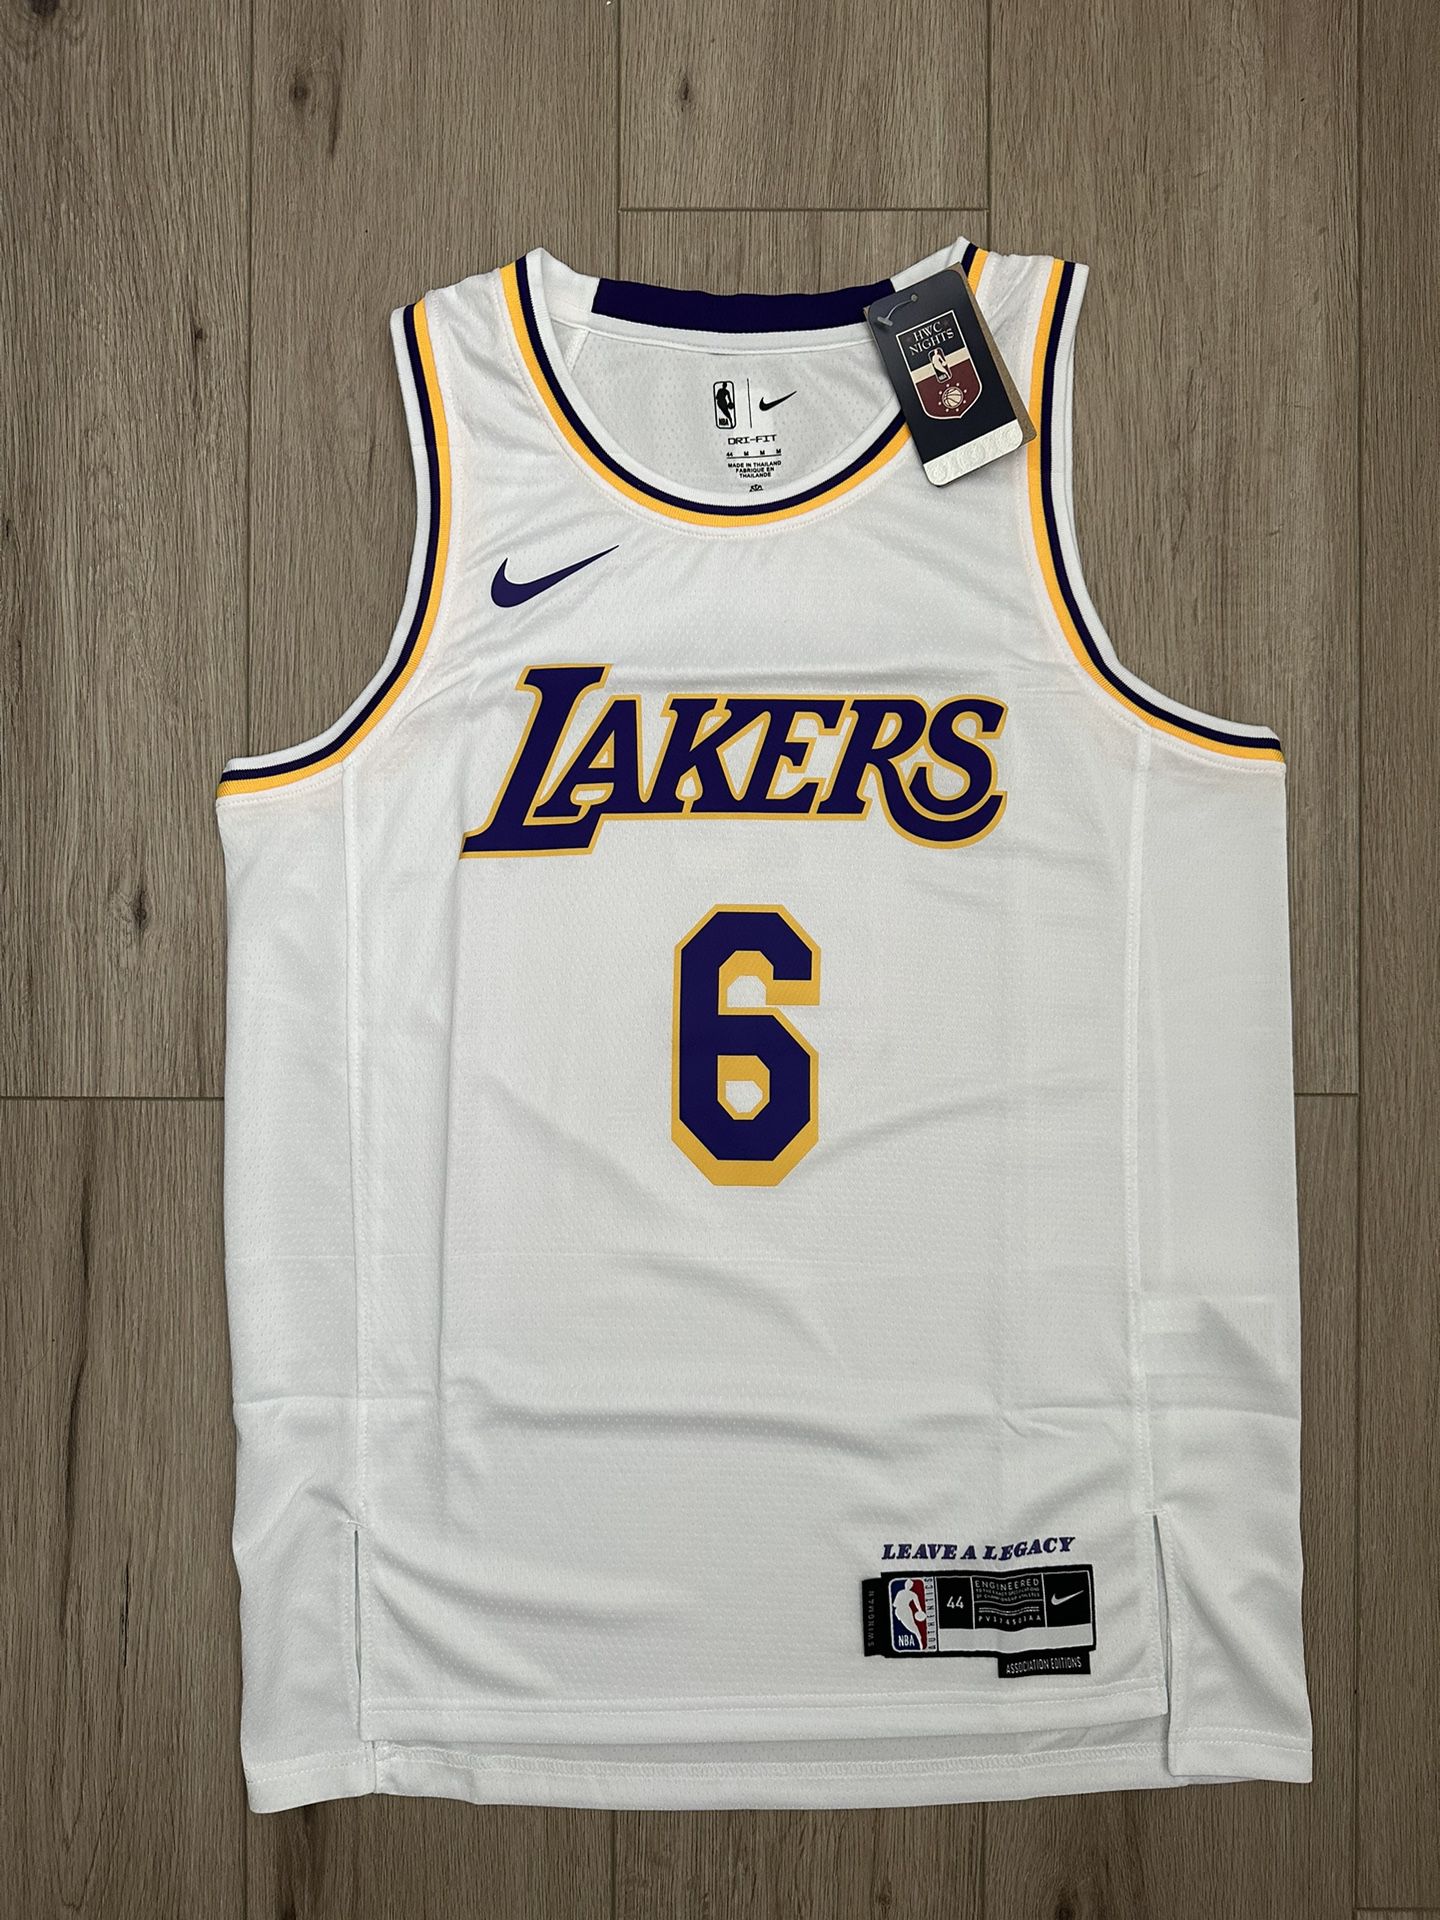 lakers jersey 2020